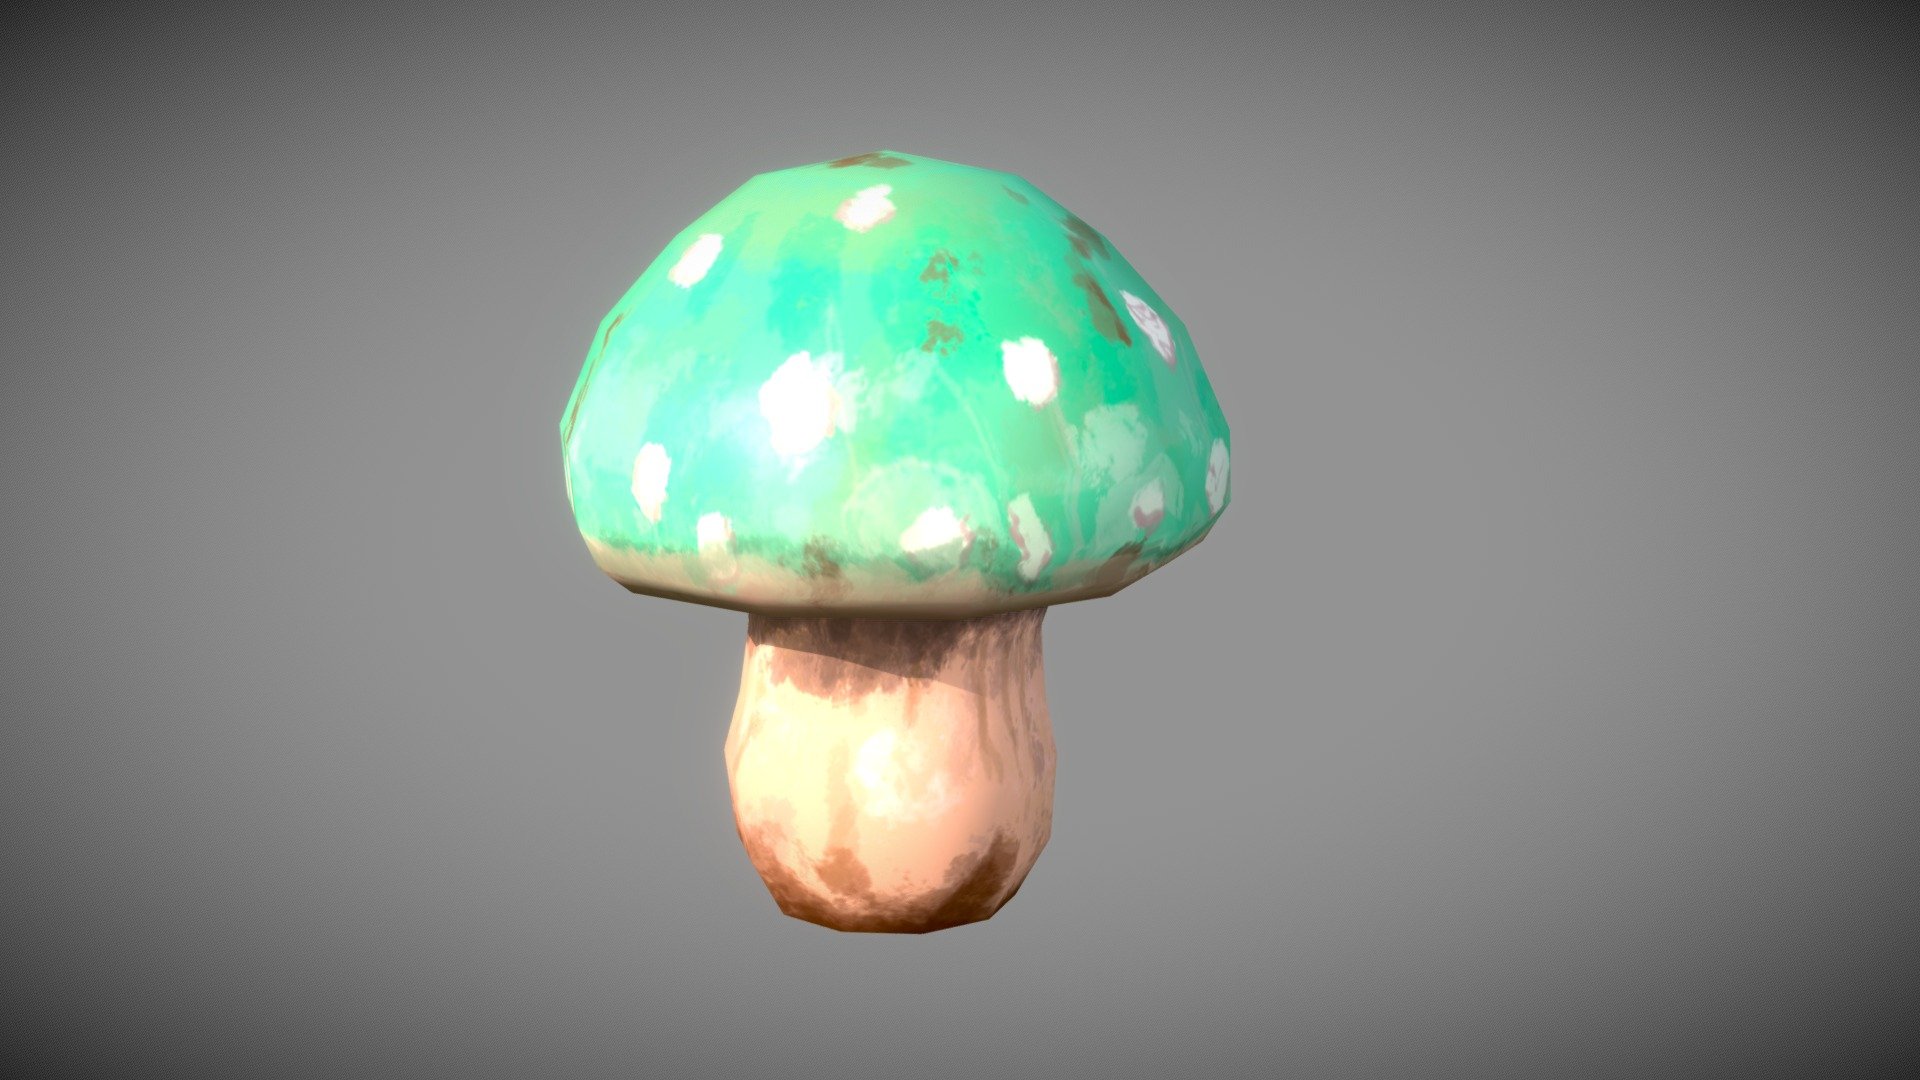 Low-poly, handpainted mushroom.
Modelled in MAYA and texture painted in photoshop.
Textures provided with bonus alternate colours 3d model